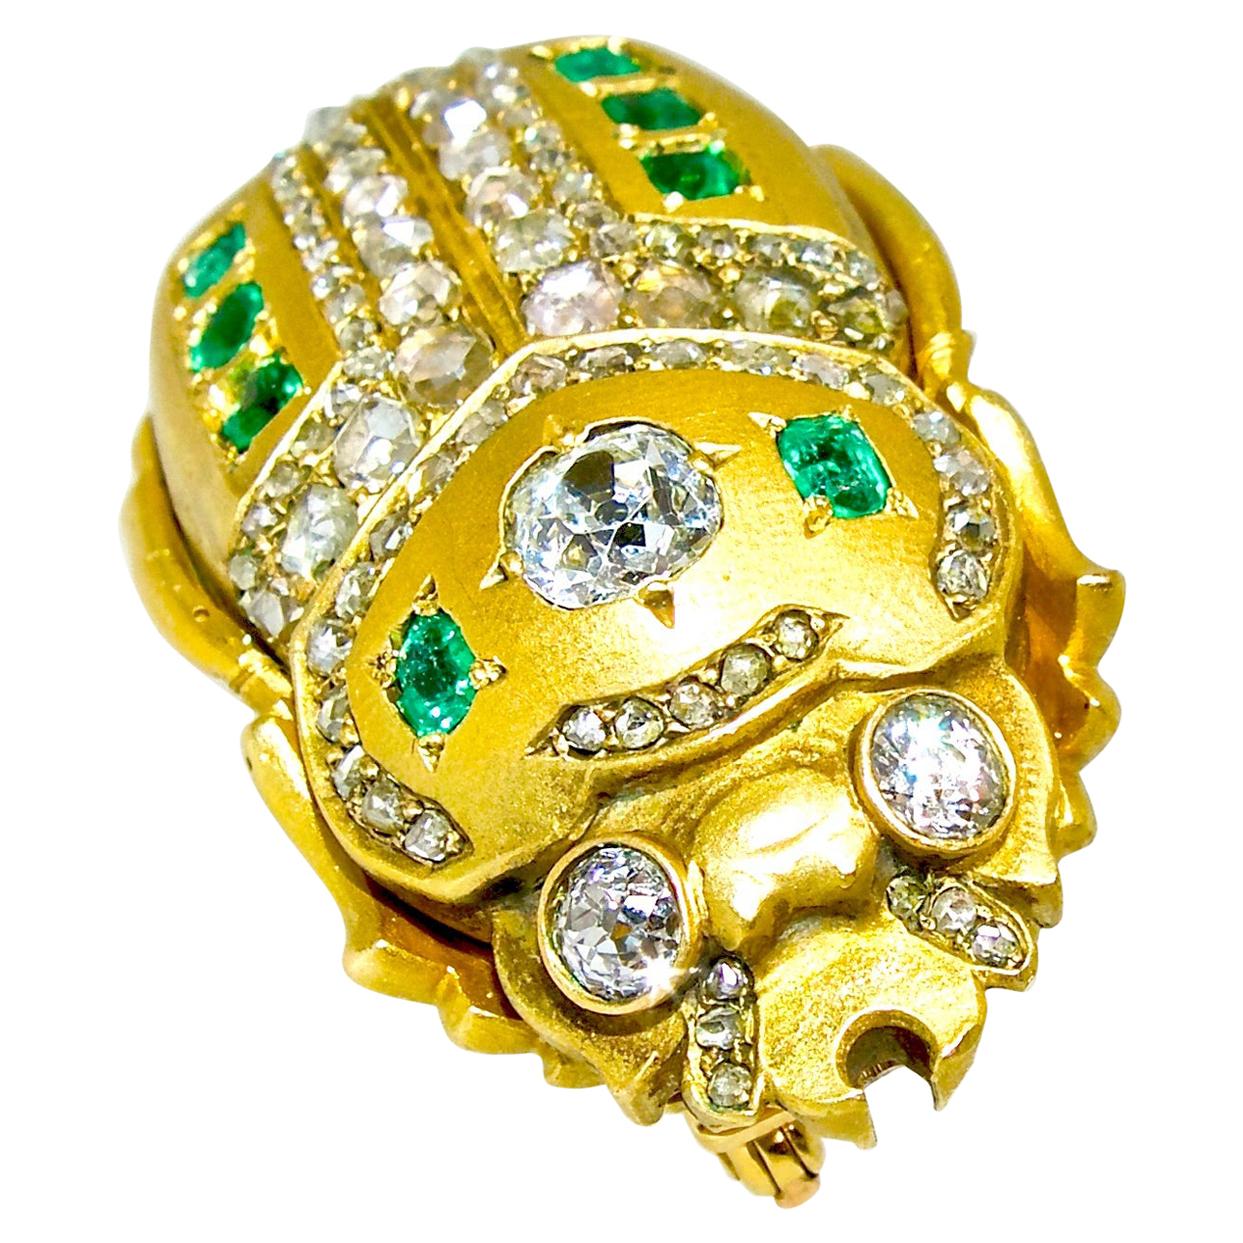 Antique Scarab Brooch with Emeralds and Diamonds, French, circa 1860